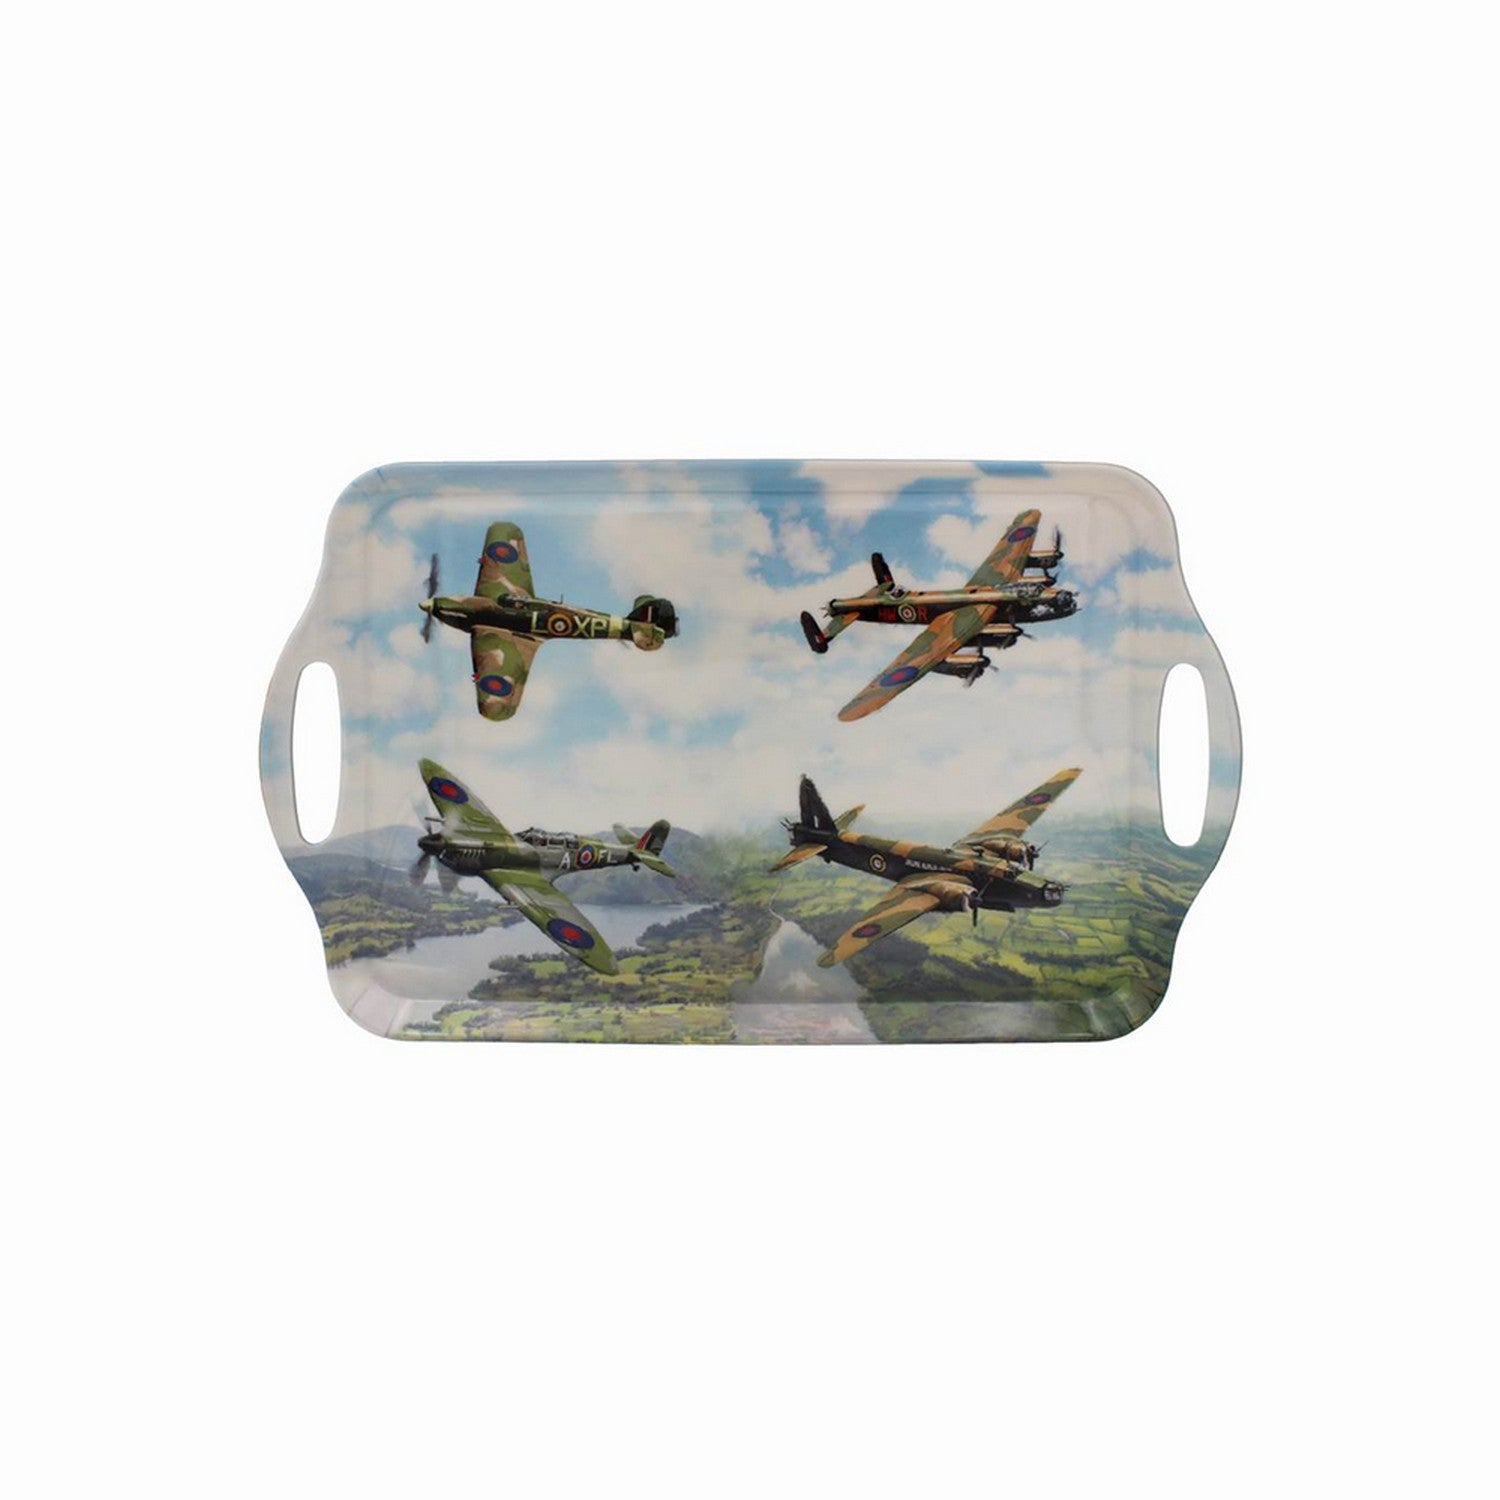 Large Classic Planes Design Serving Tray